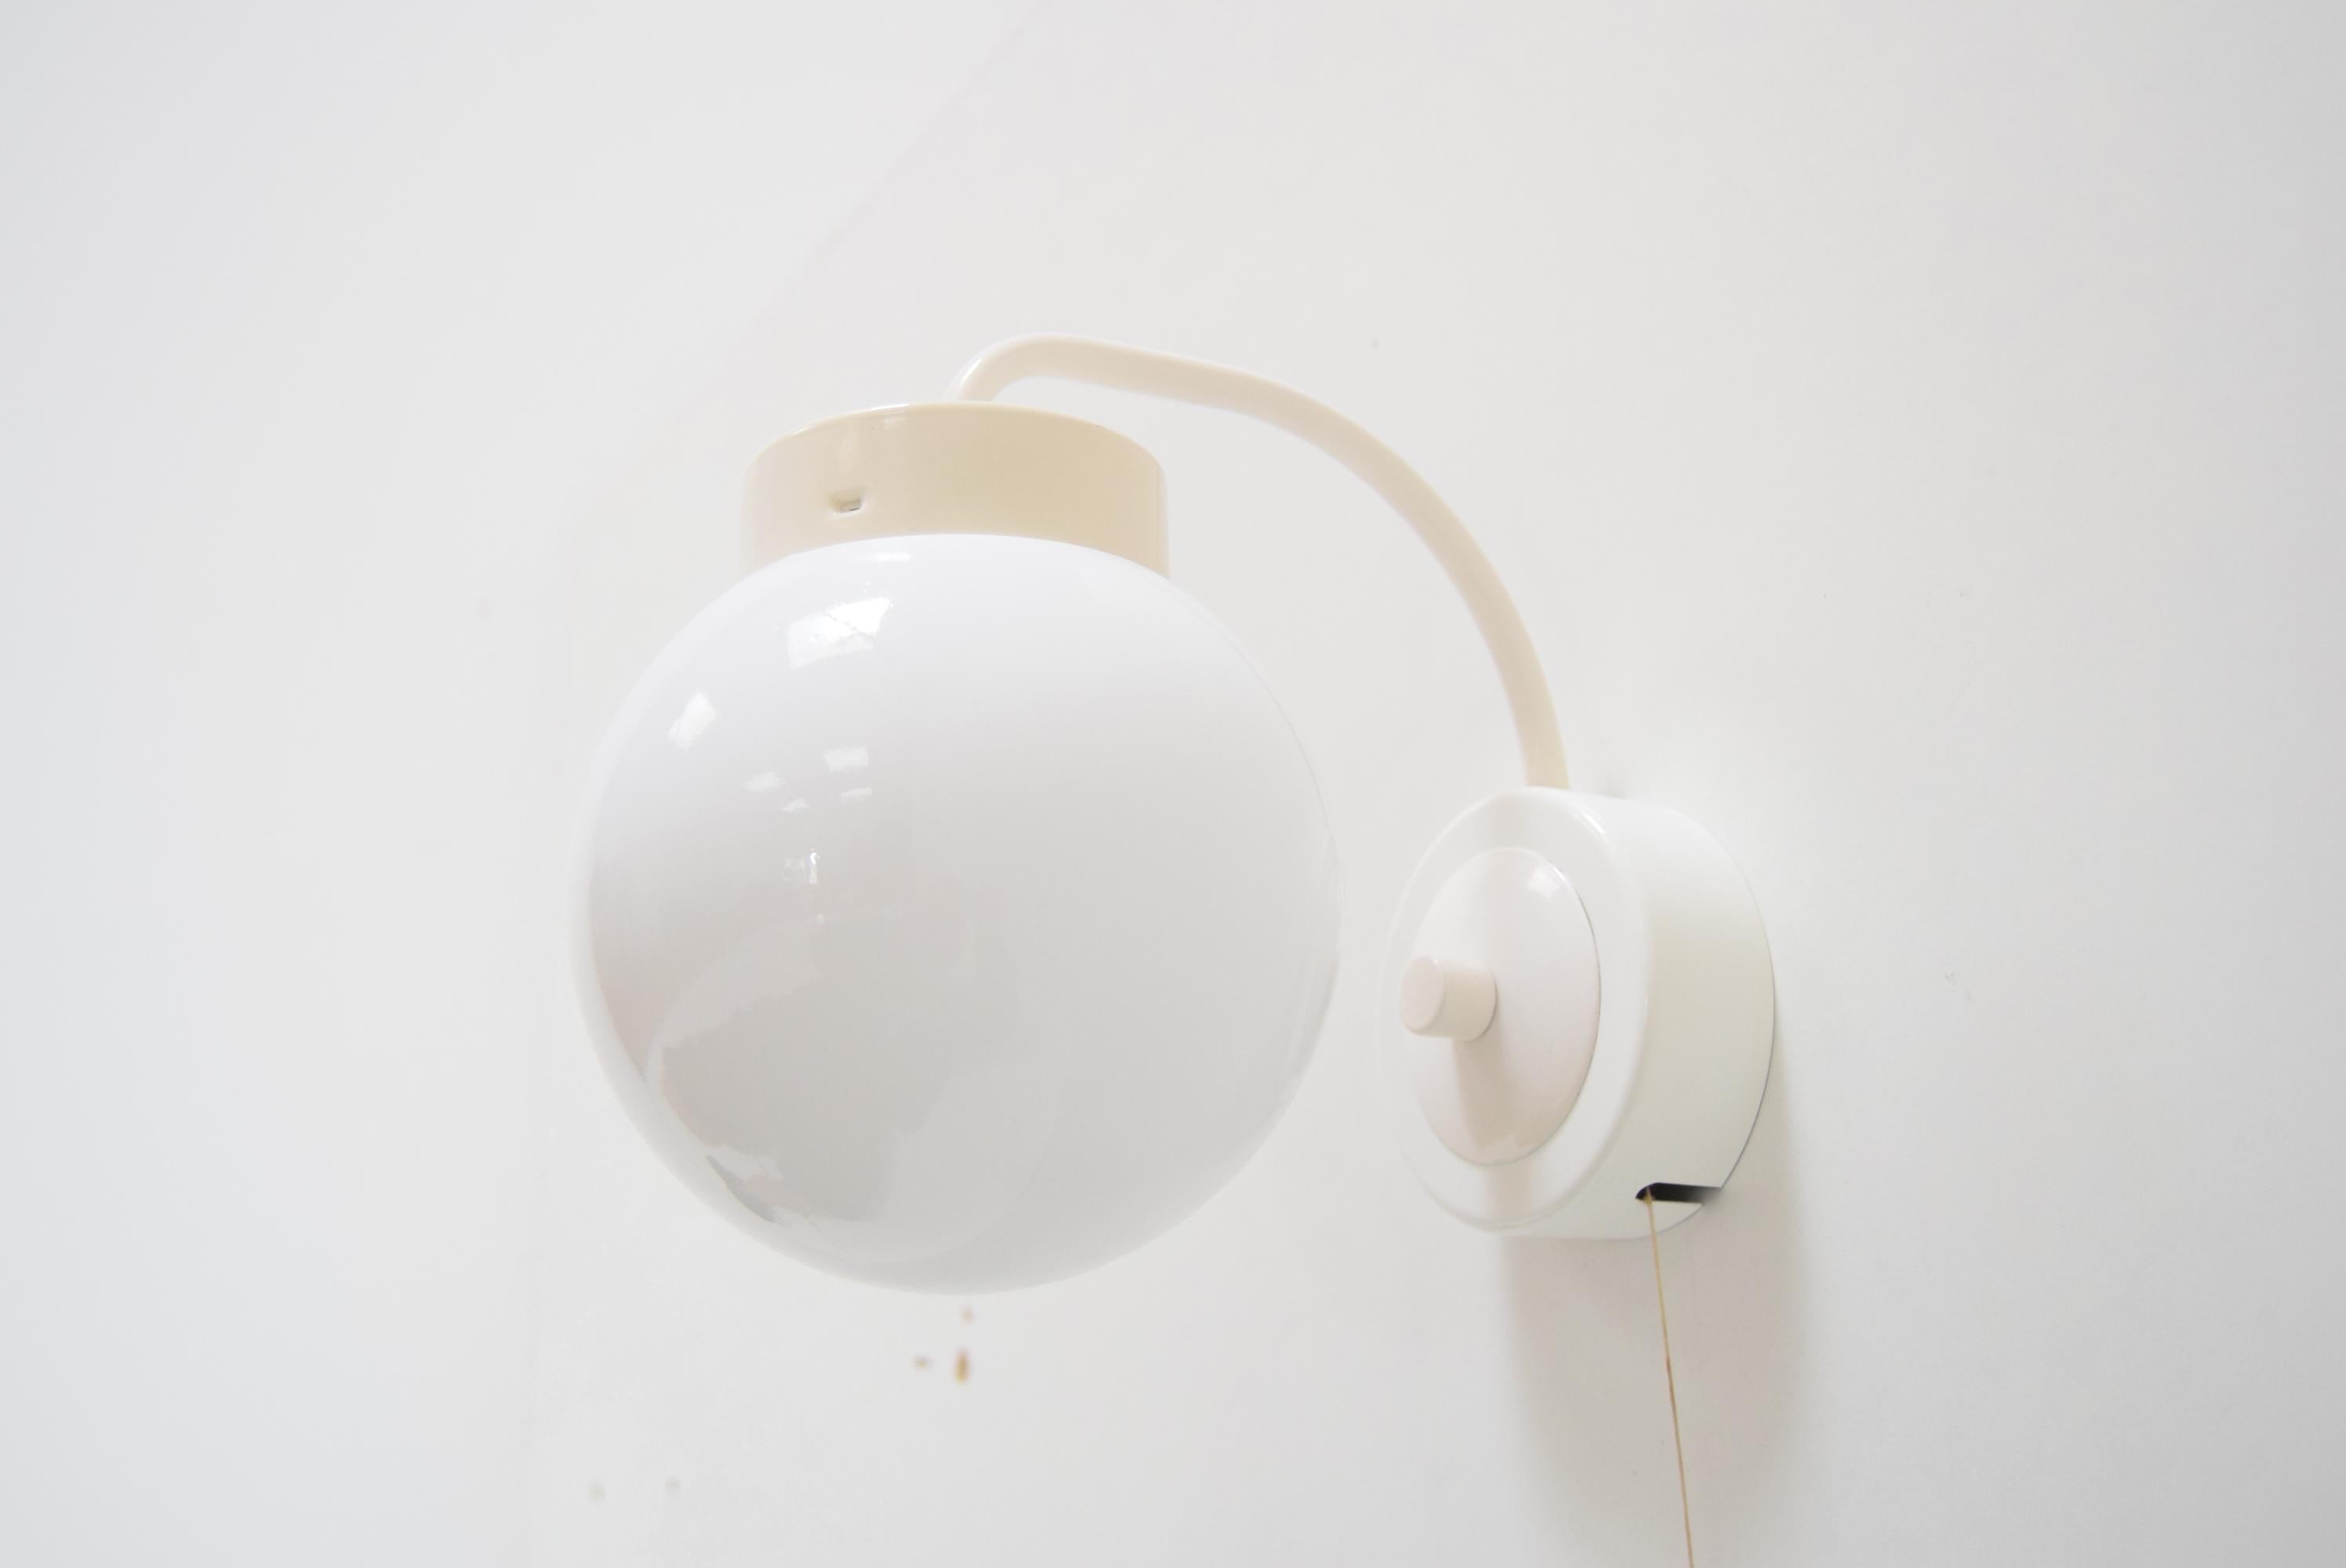 Mid-Century Wall Lamp by Instala Jilove u Decina, 1970’s  In Good Condition For Sale In Praha, CZ